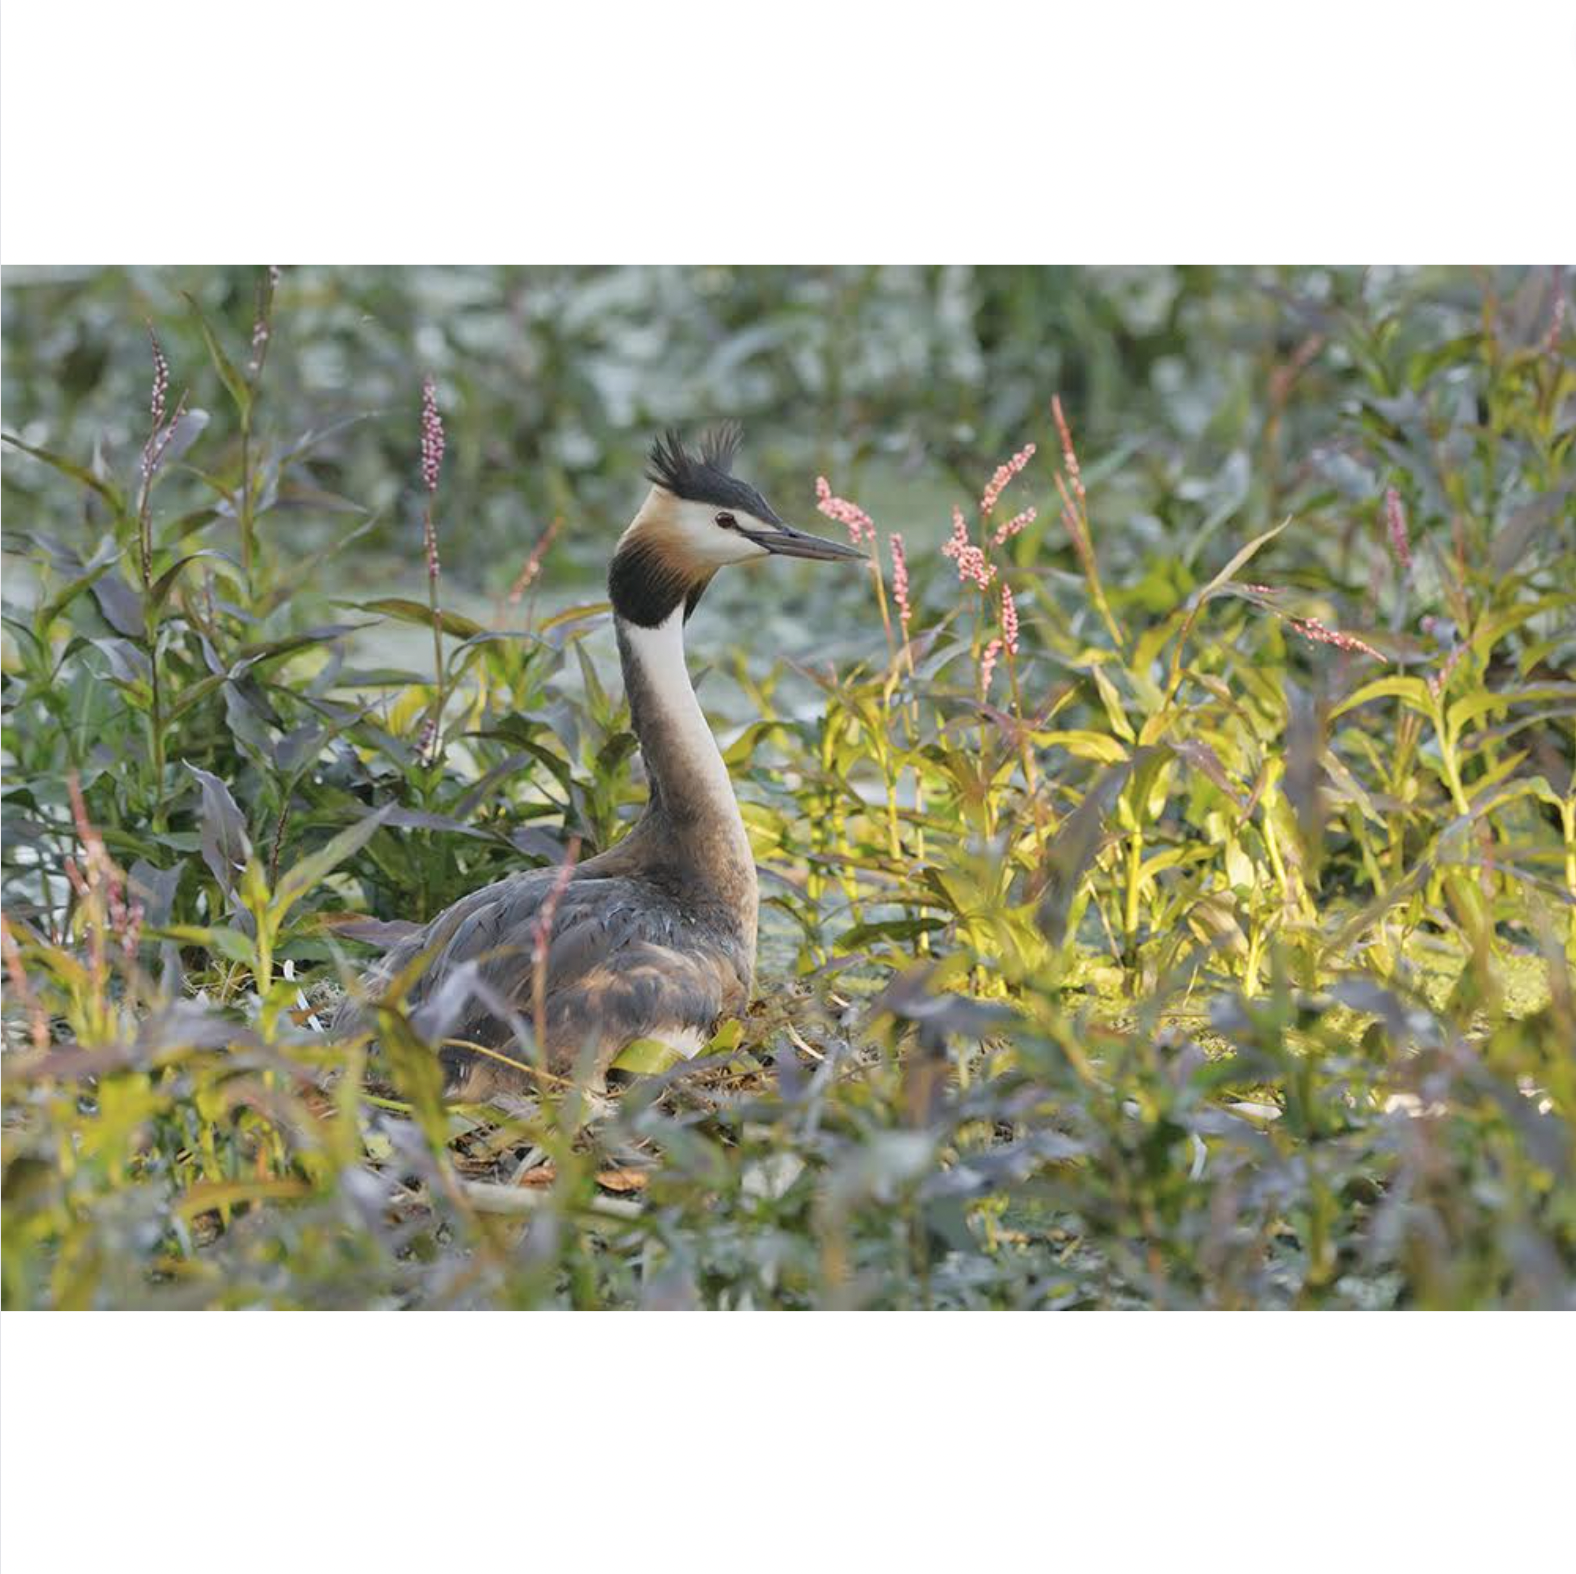 Dave Watts - Great-crested Grebe, Podiceps cristatus